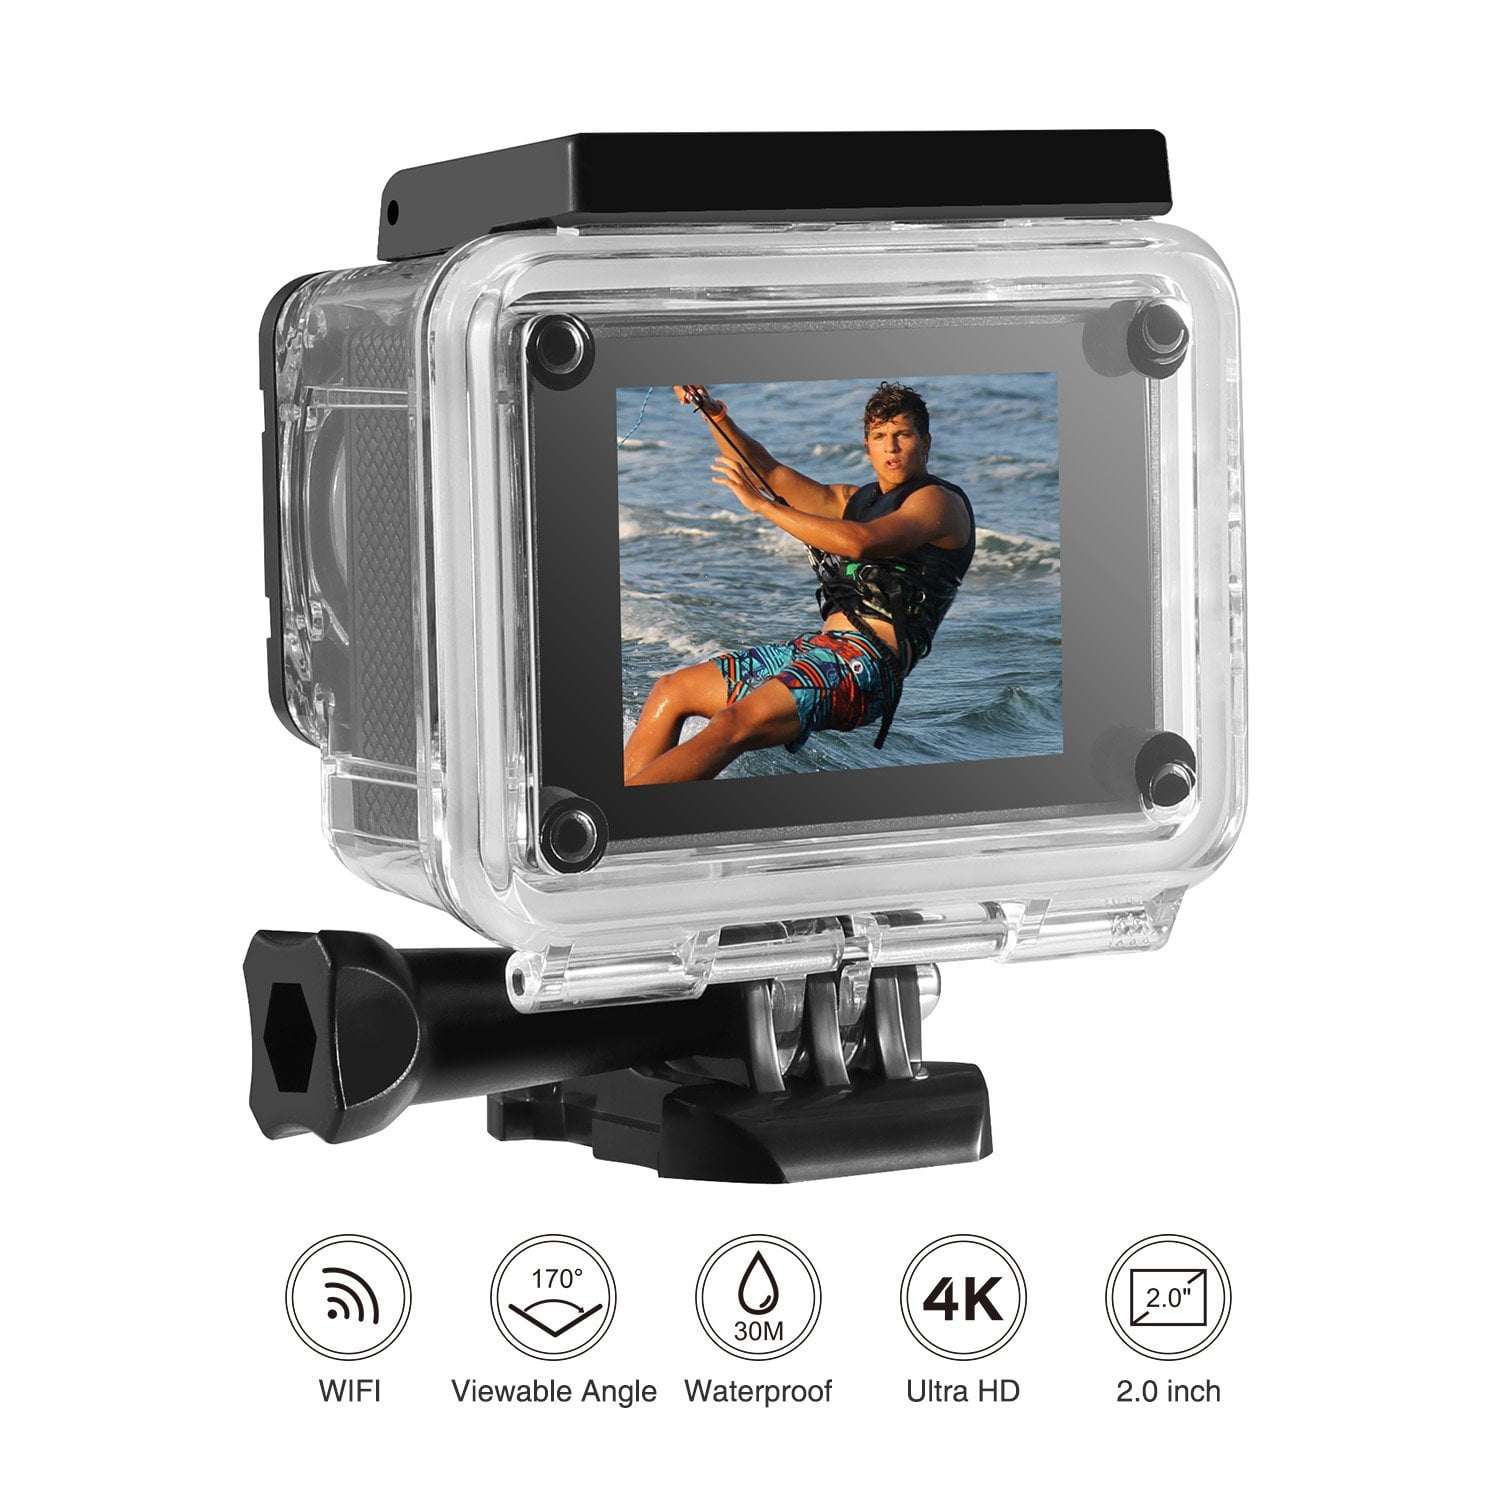 Sports Action Video Cameras Ultra HD Action Camera 30fps170D Waterproof  Underwater Video Recording Camera 4K Go Sports Pro Camera2813781 From Mg1d,  $38.46